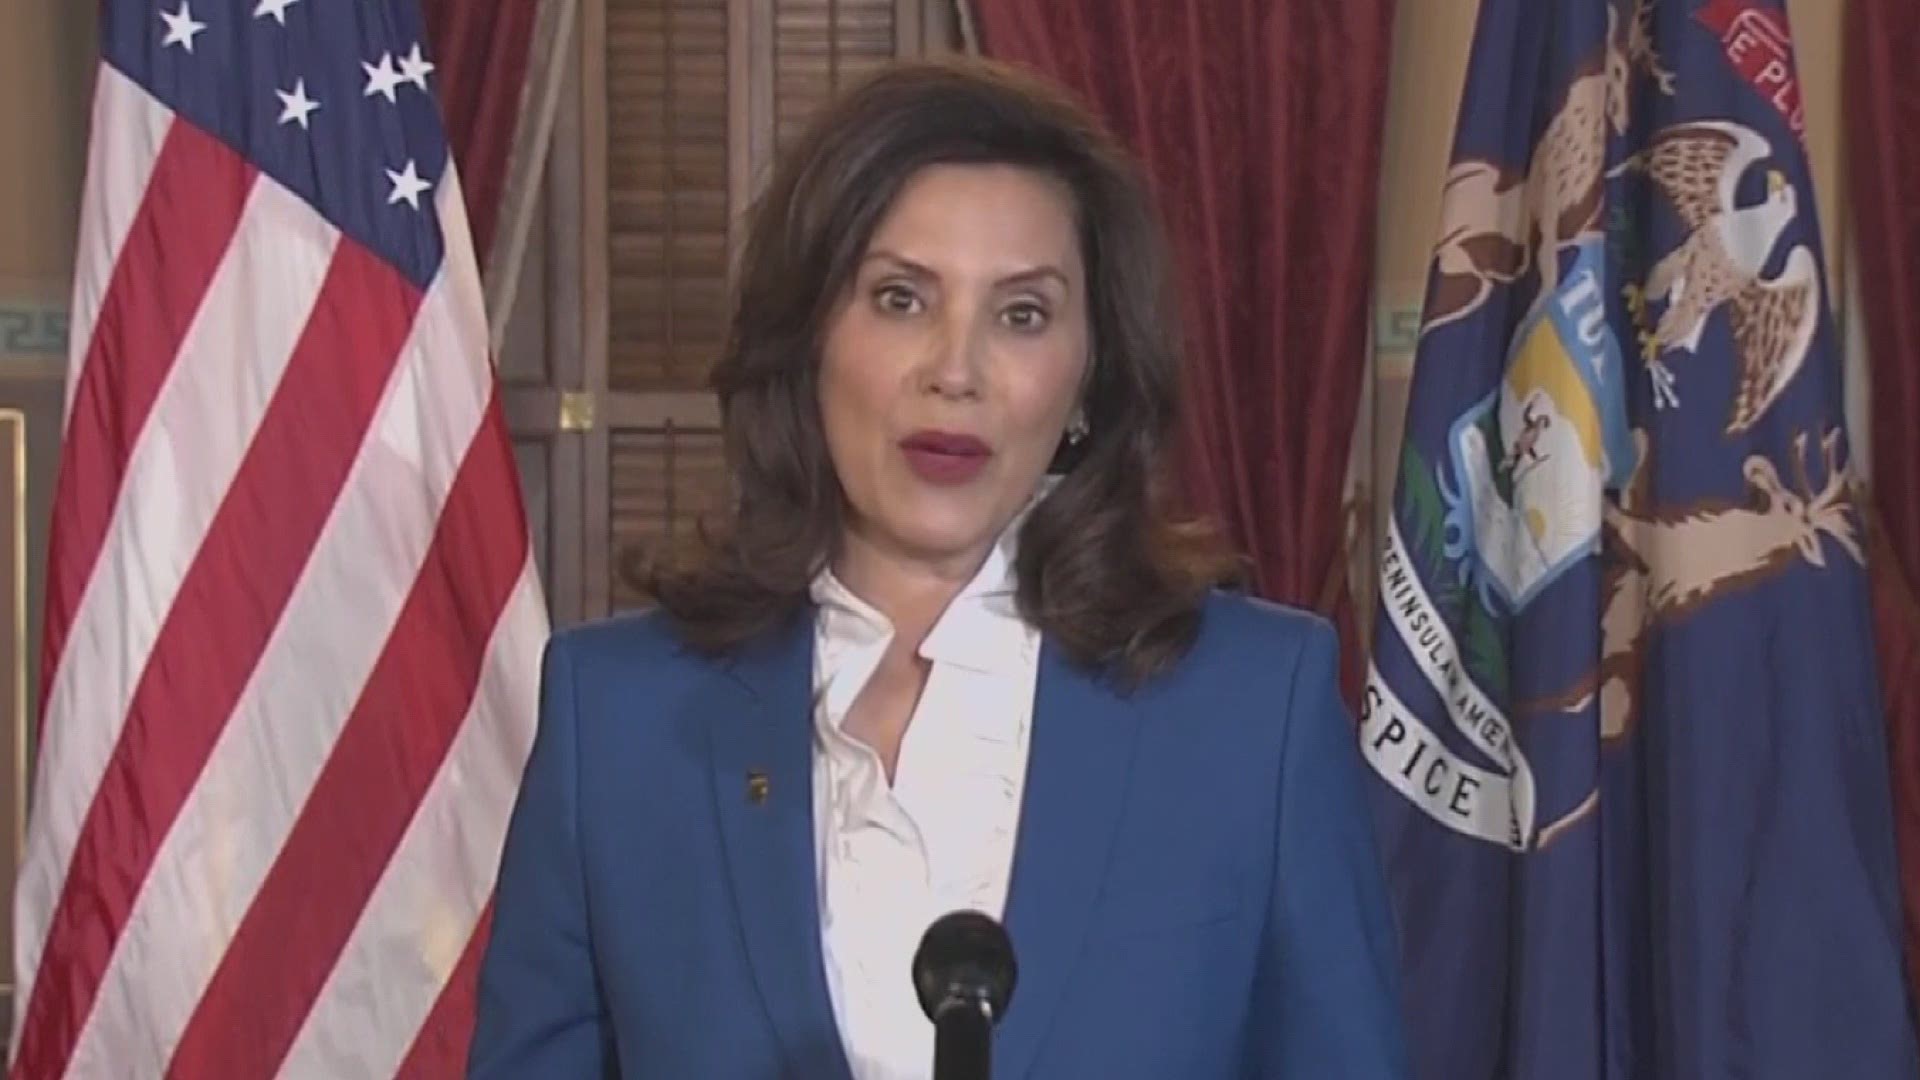 Gov. Gretchen Whitmer delivered her third State of the State address Wednesday night. Here's a recap of what she talked about.